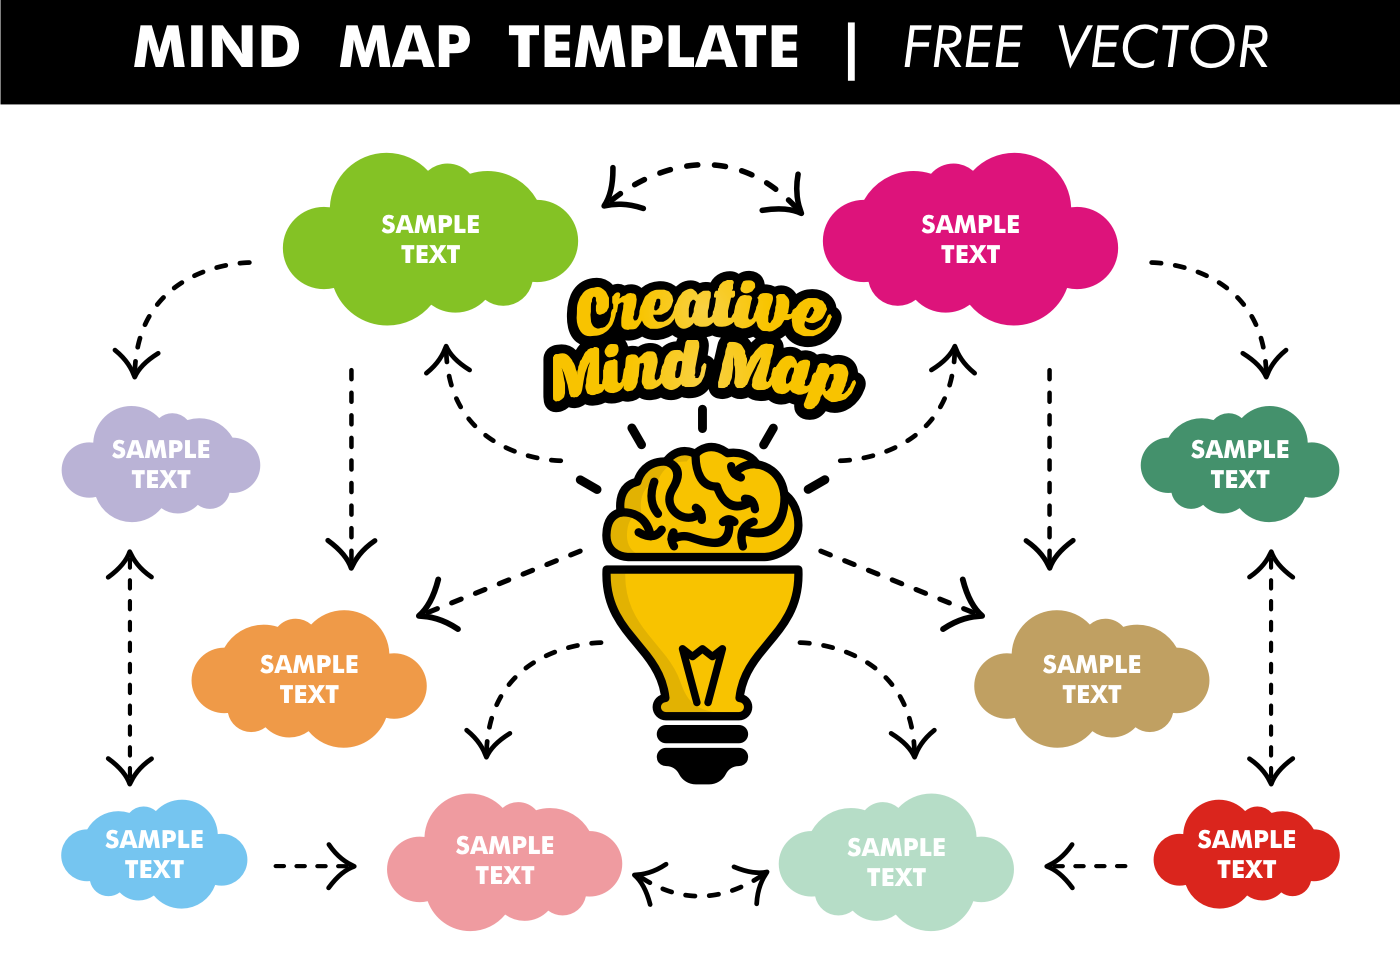 Mind Map Vector 1 